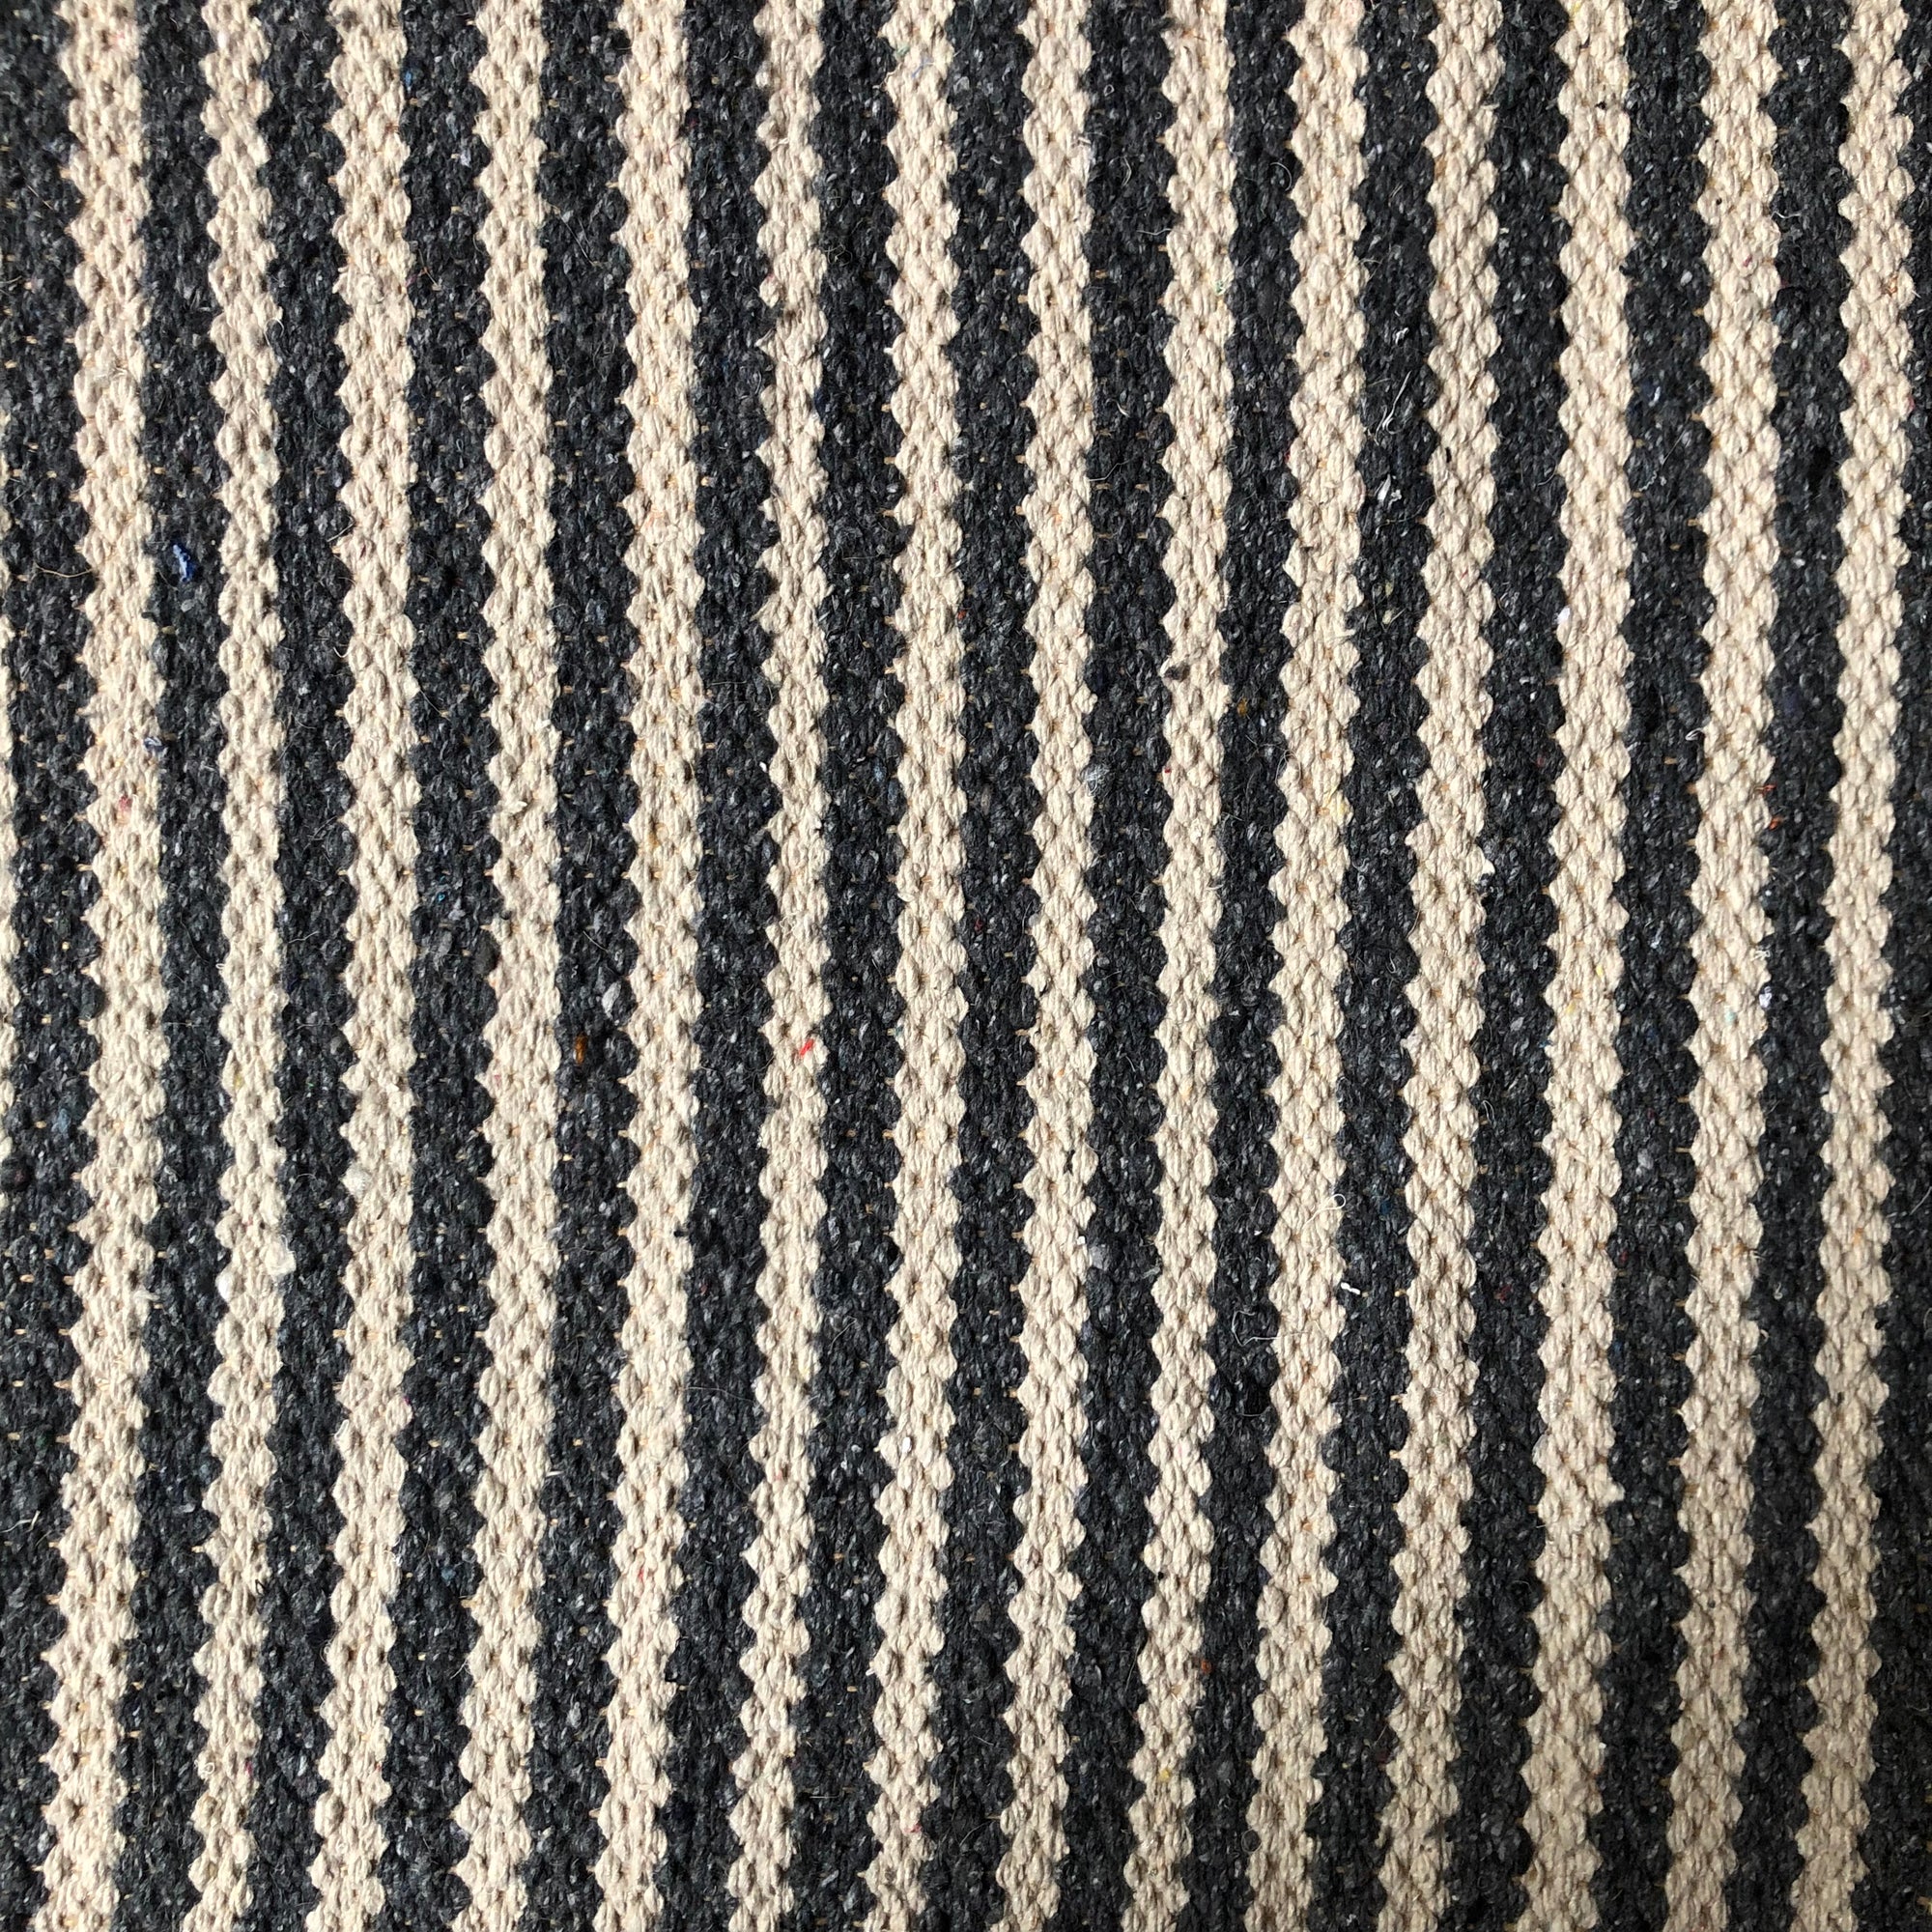 Striped Rug - Cotton and Jute